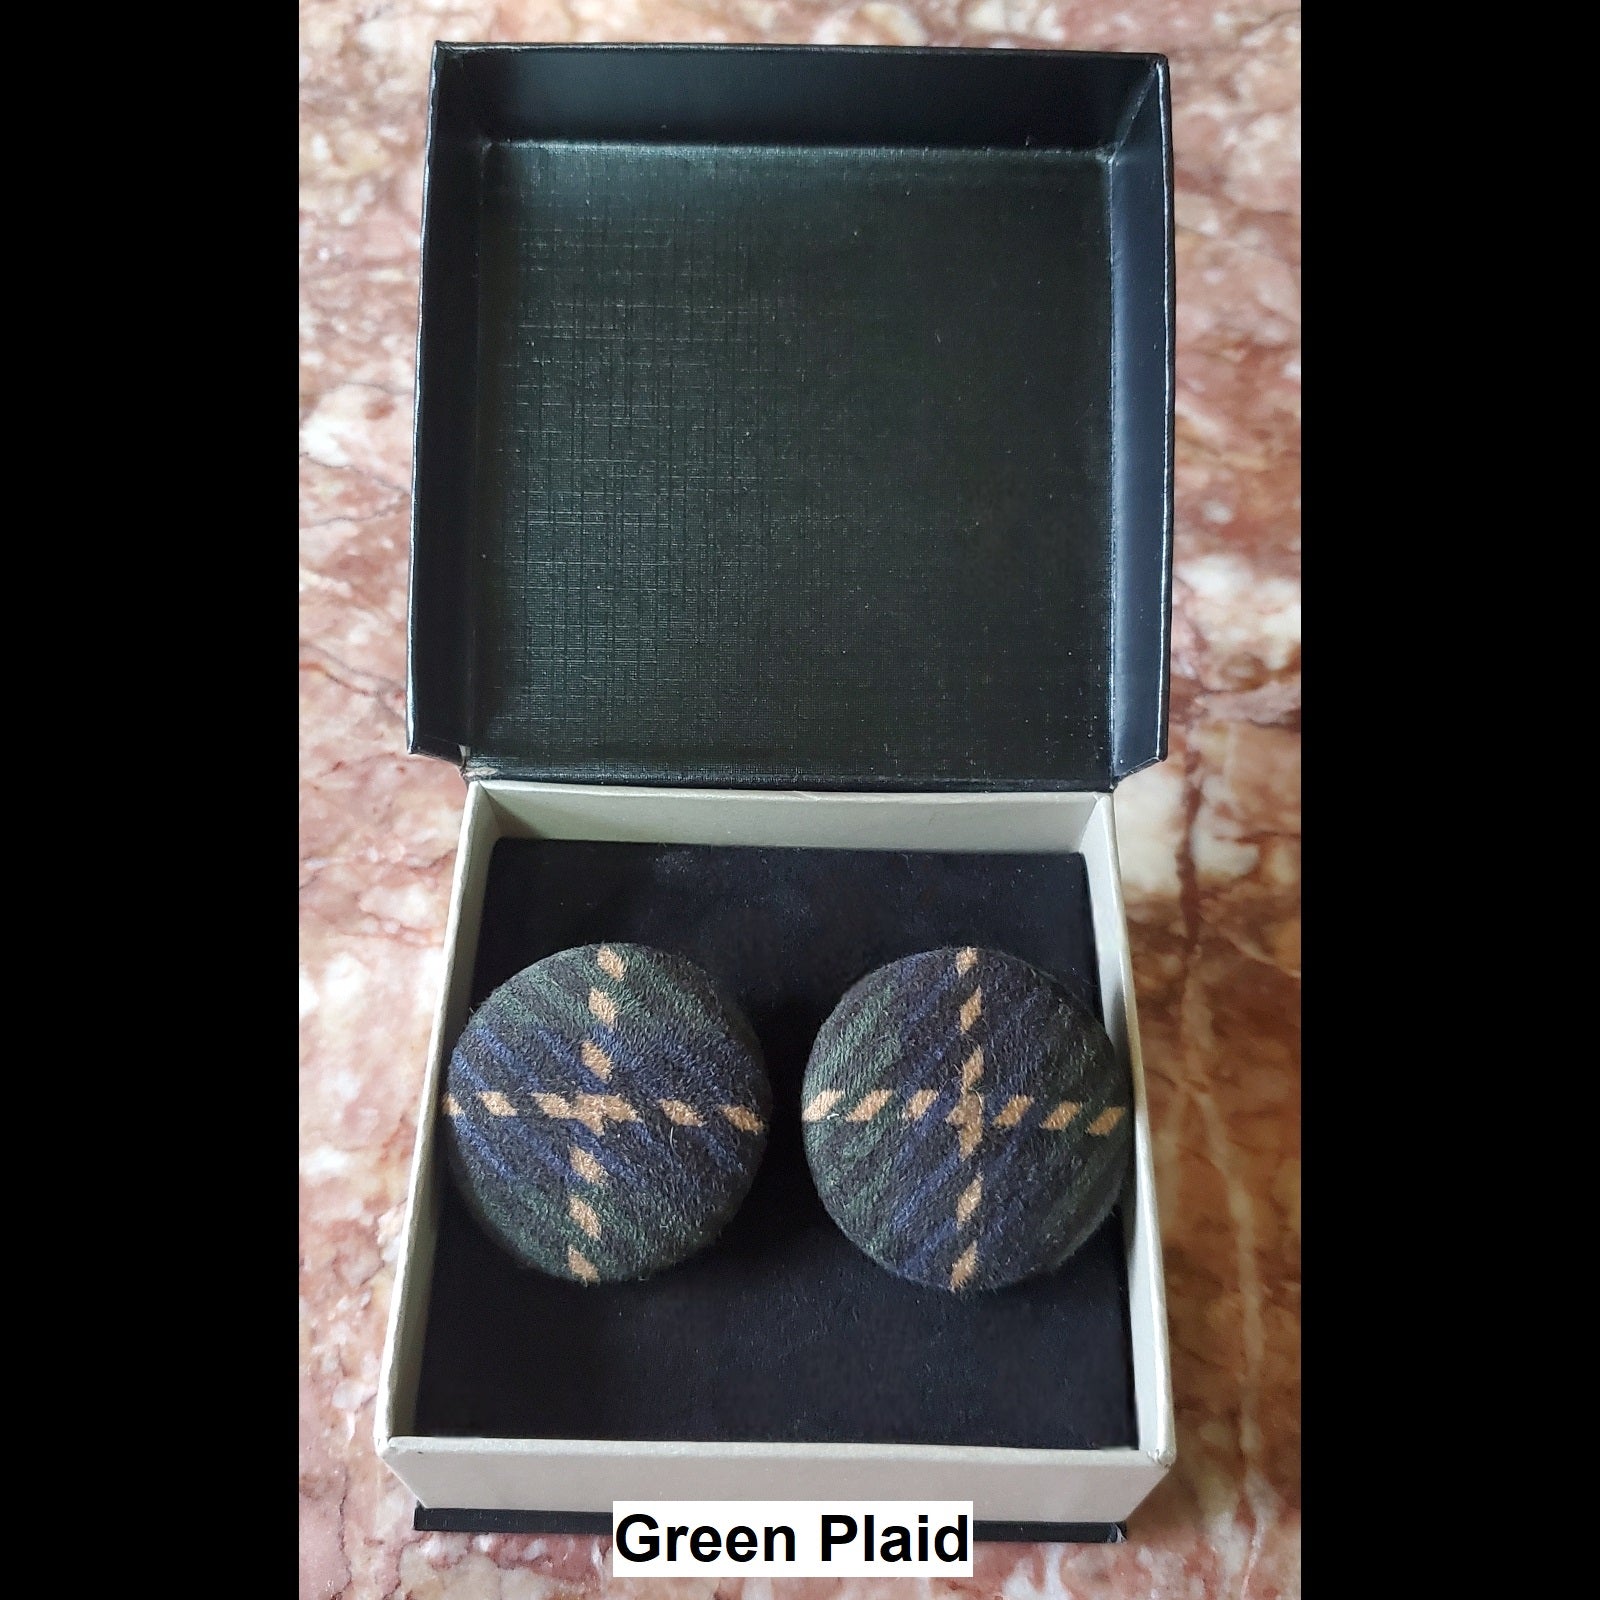 Green plaid button earrings in jewelry box 